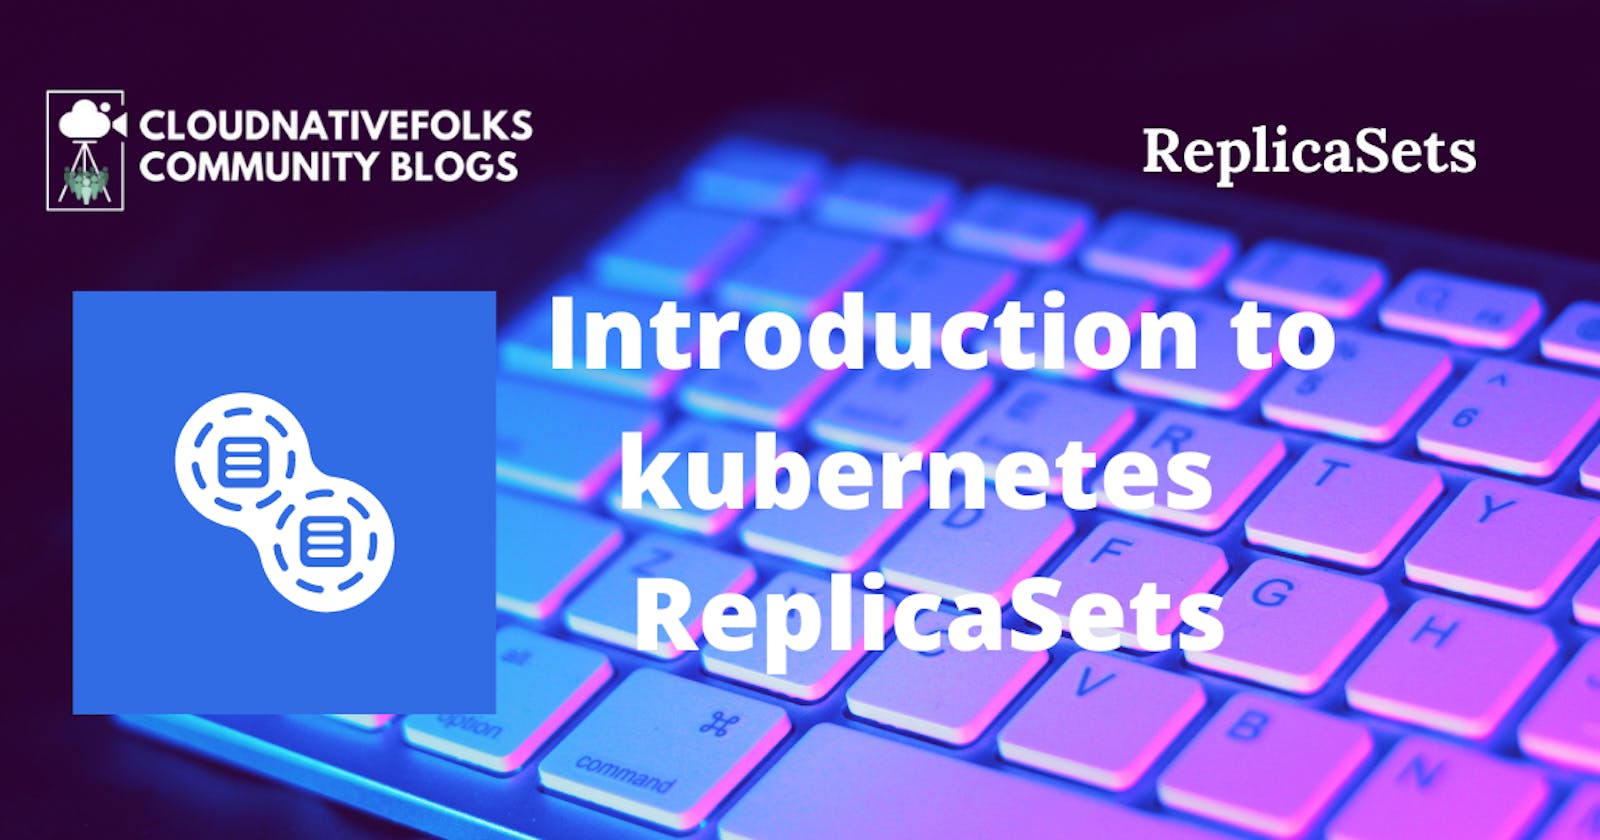 Introduction to kubernetes - ReplicaSets